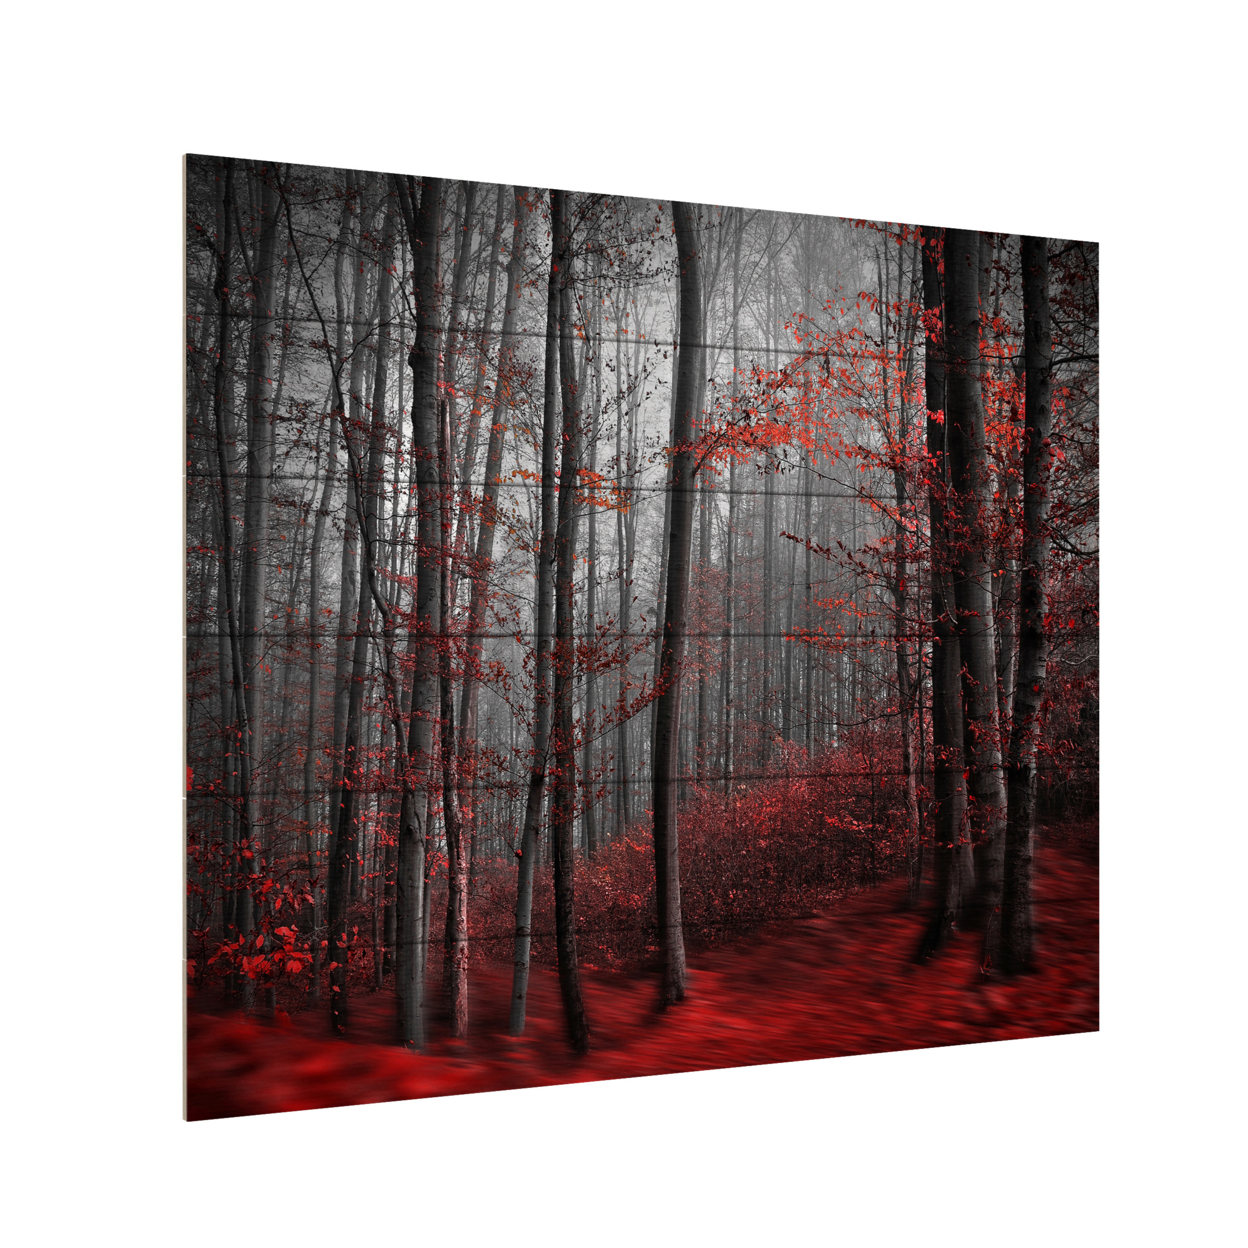 Wooden Slat Art 18 X 22 Inches Titled Bloody River Ready To Hang Home Decor Picture